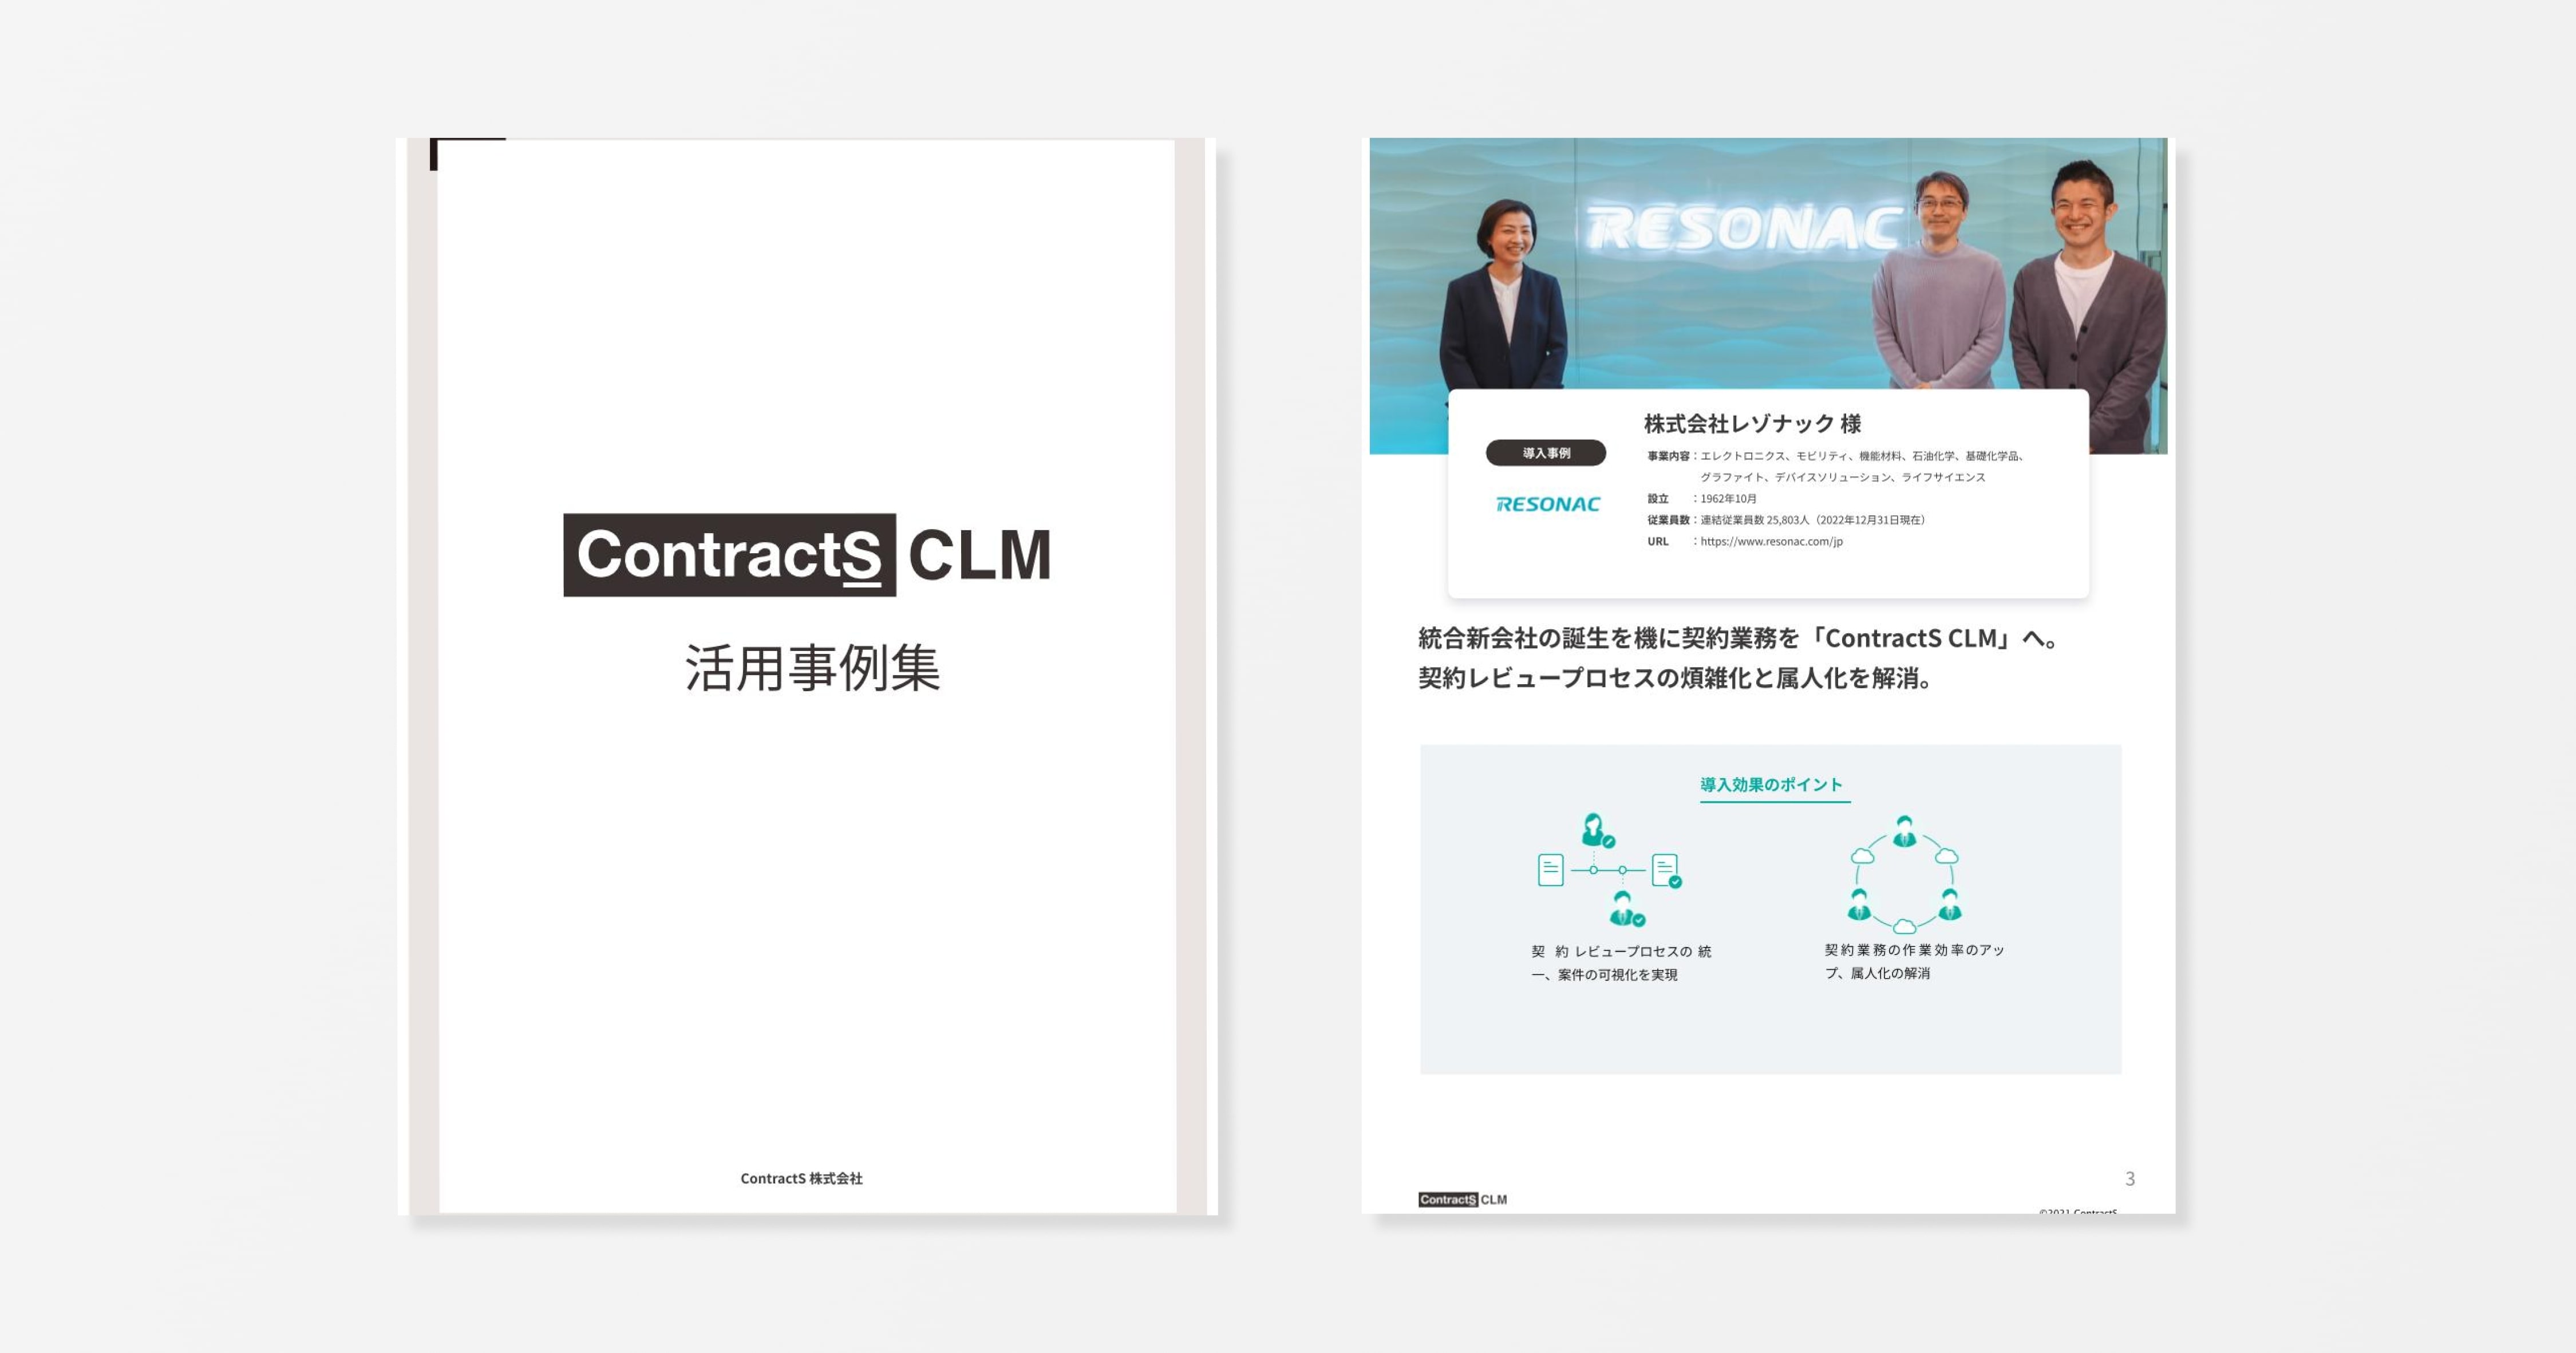 ContractS CLM活用事例集